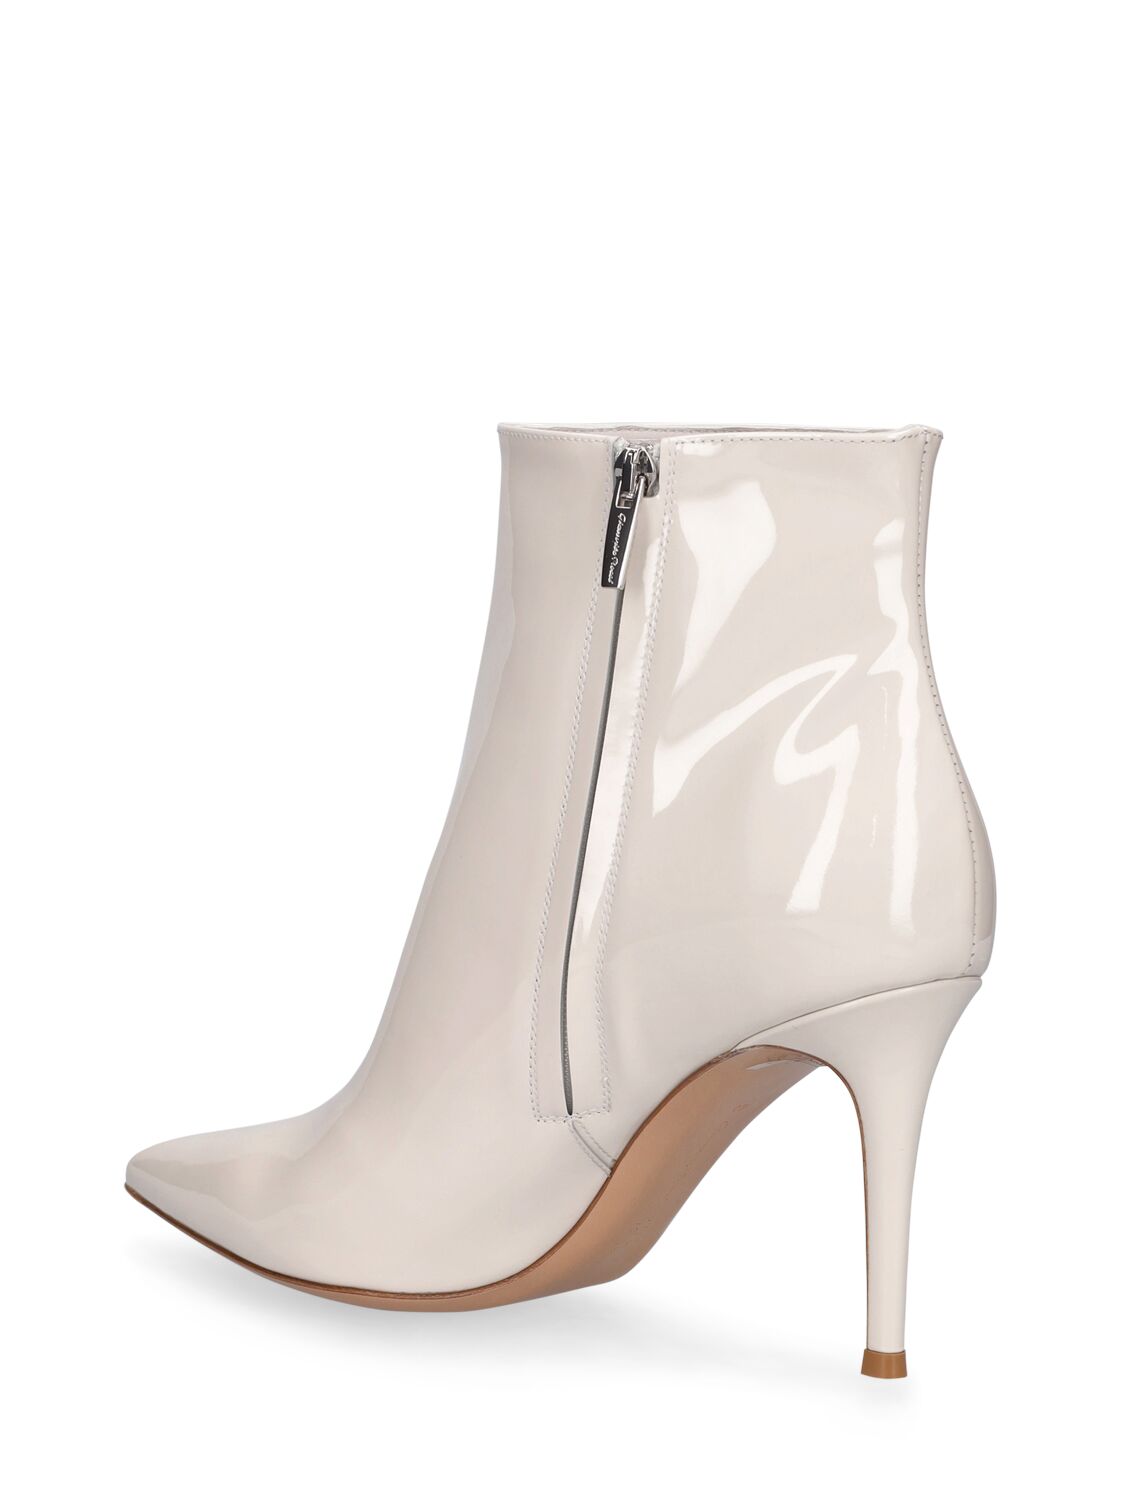 Shop Gianvito Rossi 85mm Patent Leather Ankle Boots In Off White